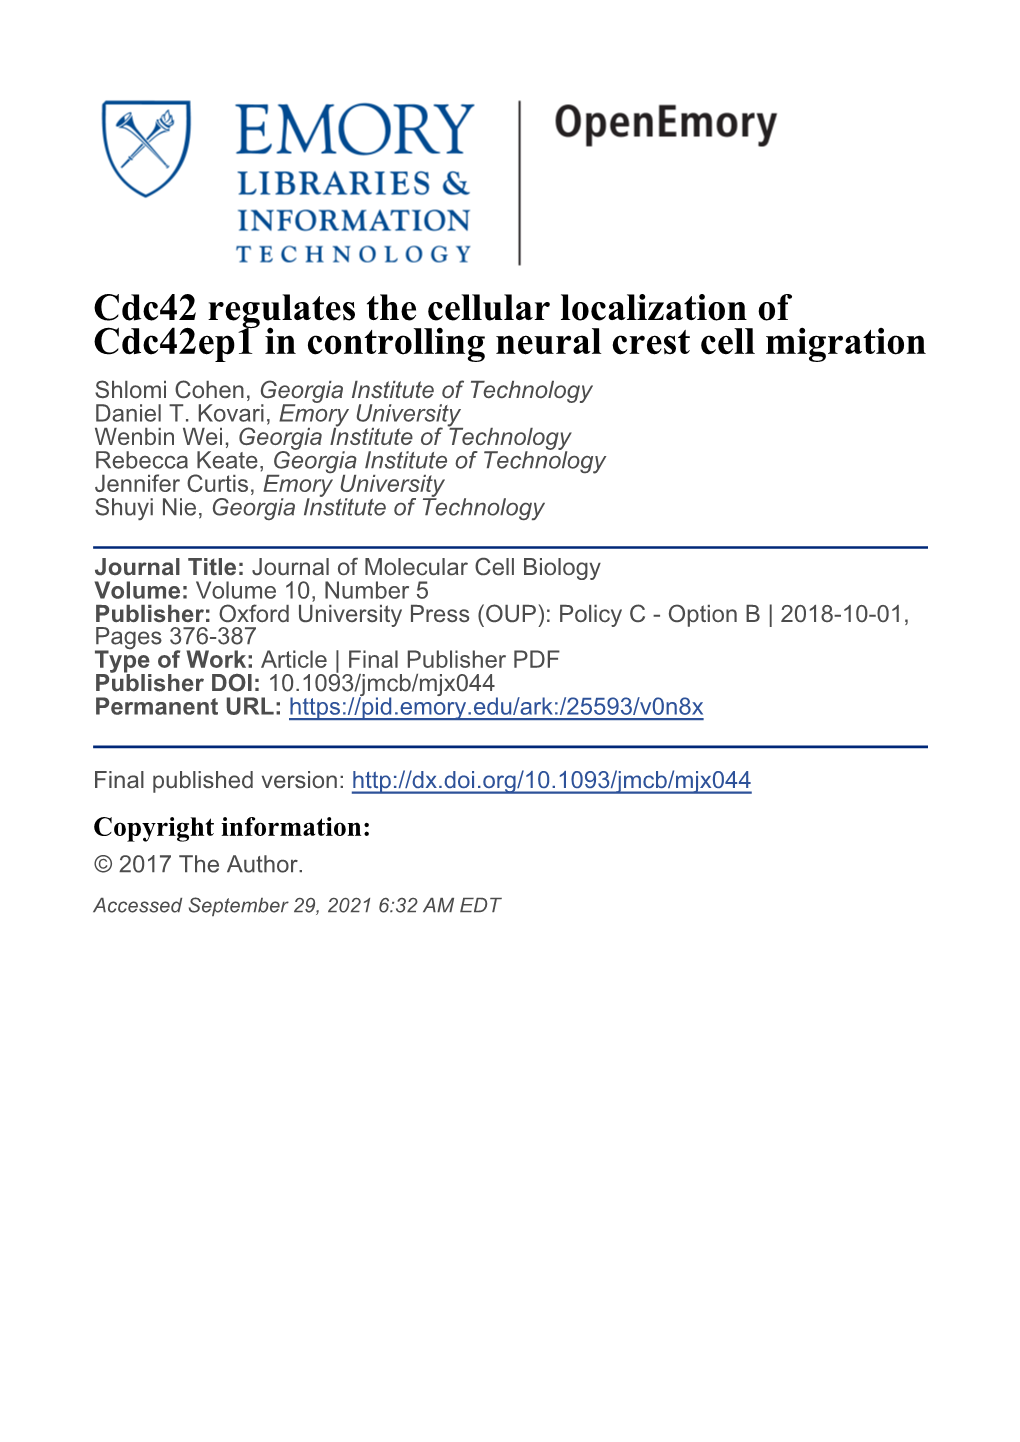 Cdc42 Regulates the Cellular Localization of Cdc42ep1 in Controlling Neural Crest Cell Migration Shlomi Cohen, Georgia Institute of Technology Daniel T